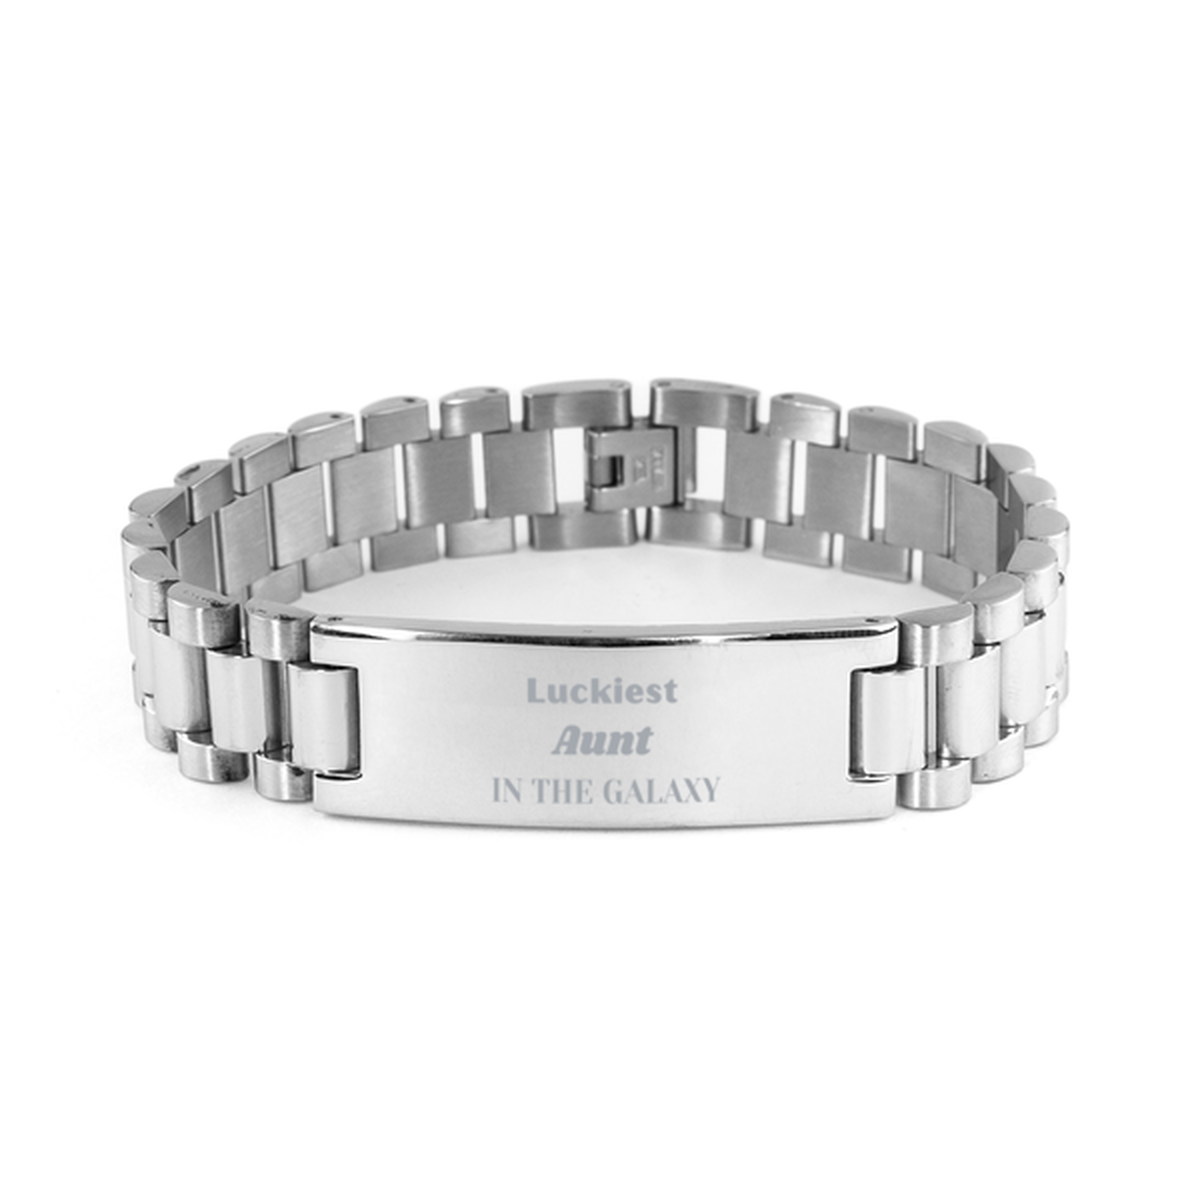 Luckiest Aunt in the Galaxy, To My Aunt Engraved Gifts, Christmas Aunt Ladder Stainless Steel Bracelet Gifts, X-mas Birthday Unique Gifts For Aunt Men Women